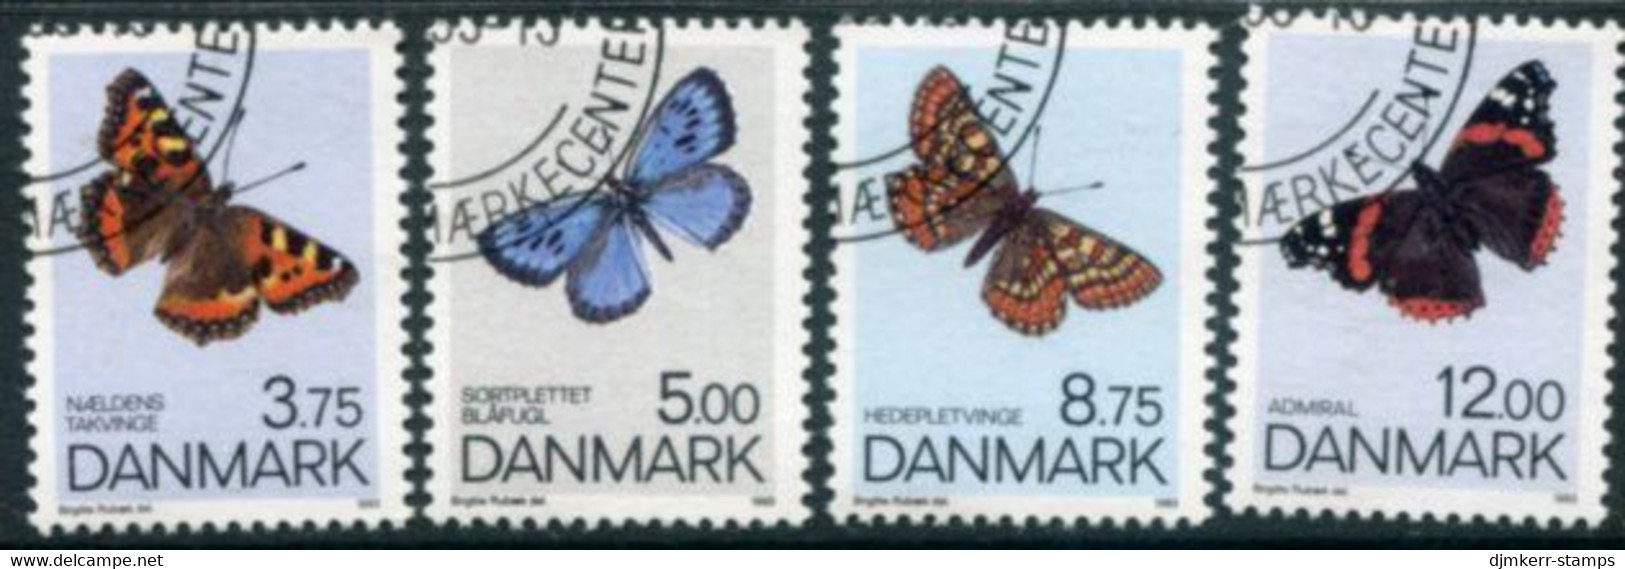 DENMARK 1993 Butterflies Used   Michel 1048-51 - Used Stamps